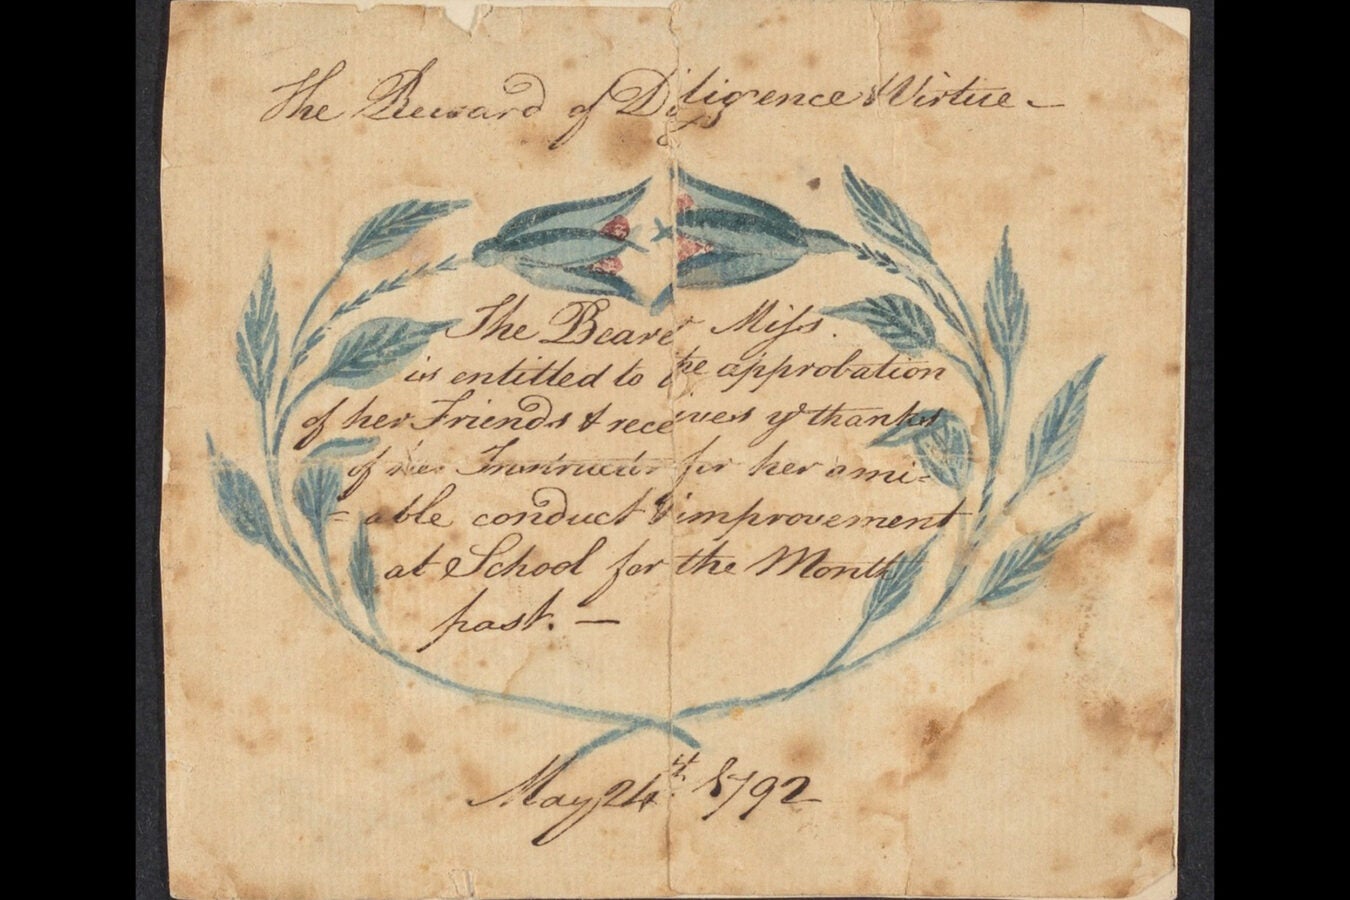 A school award given in 1792.